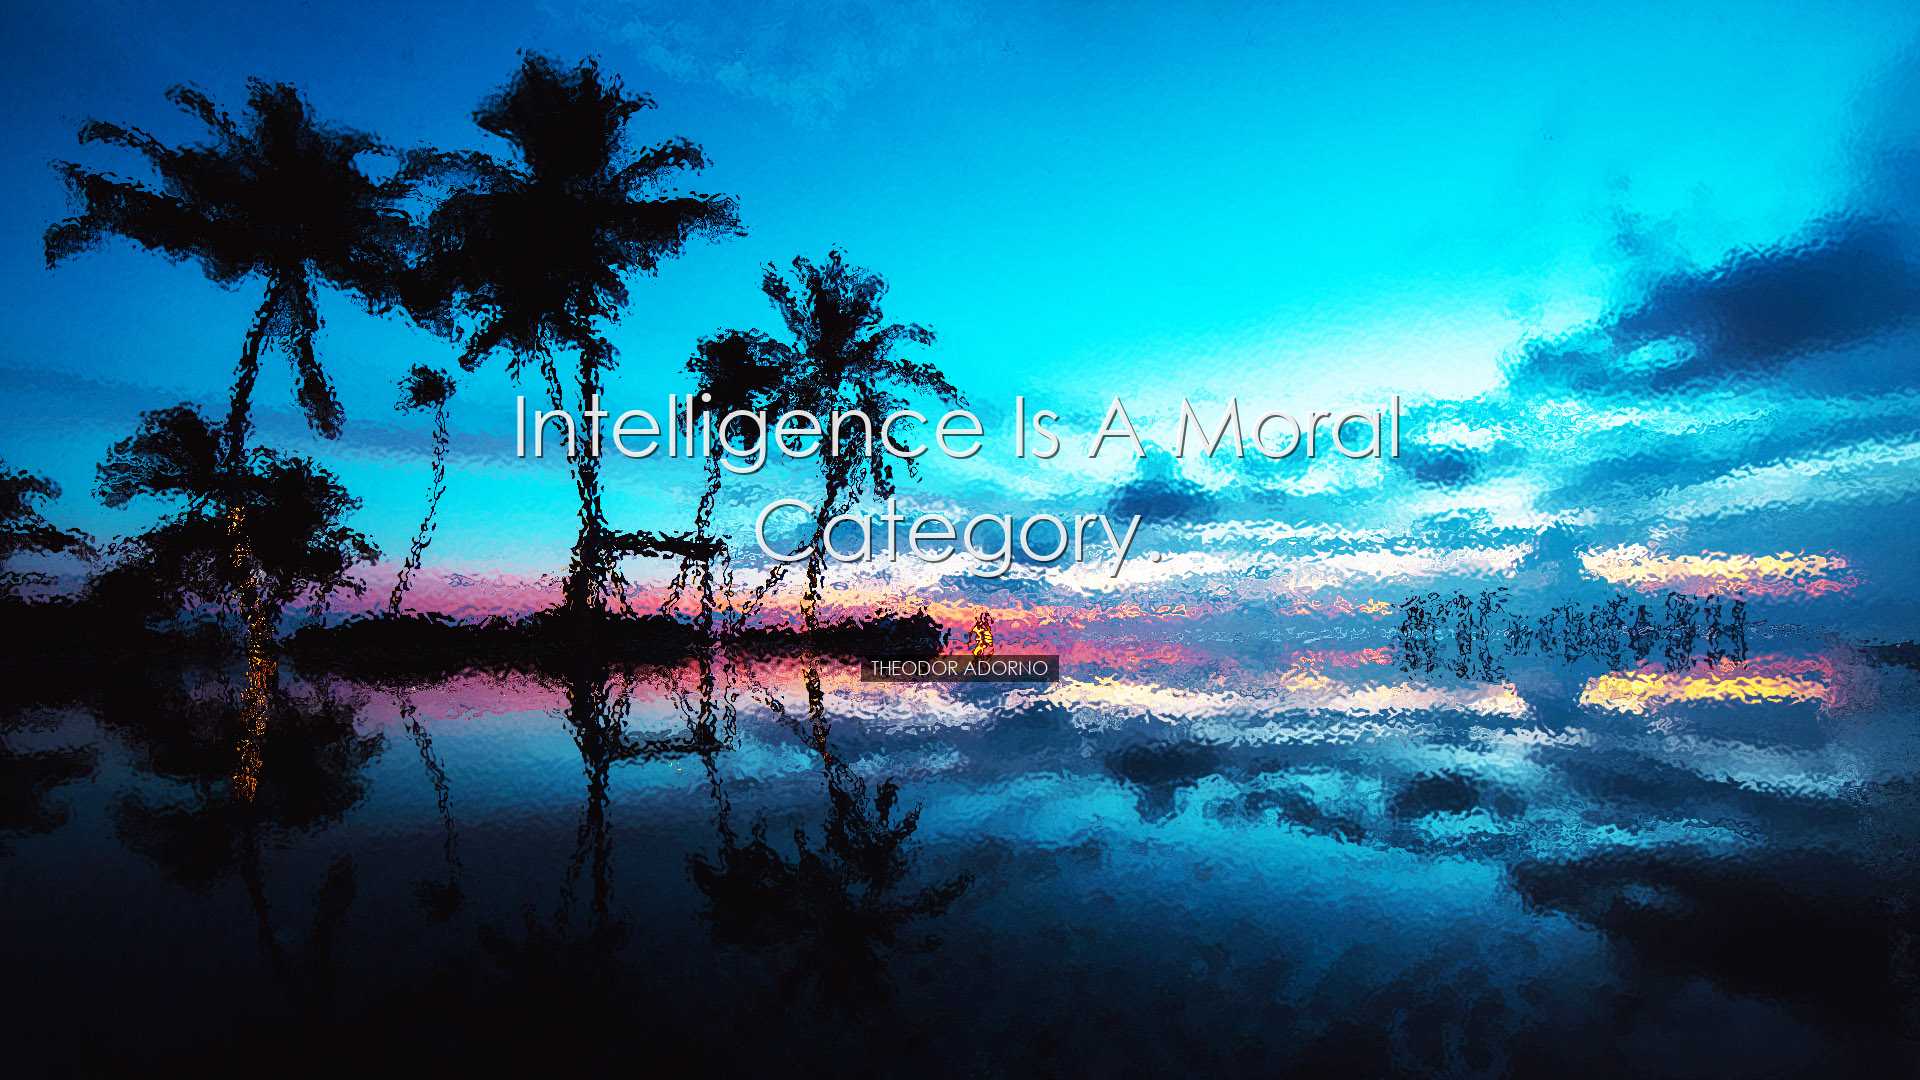 Intelligence is a moral category. - Theodor Adorno